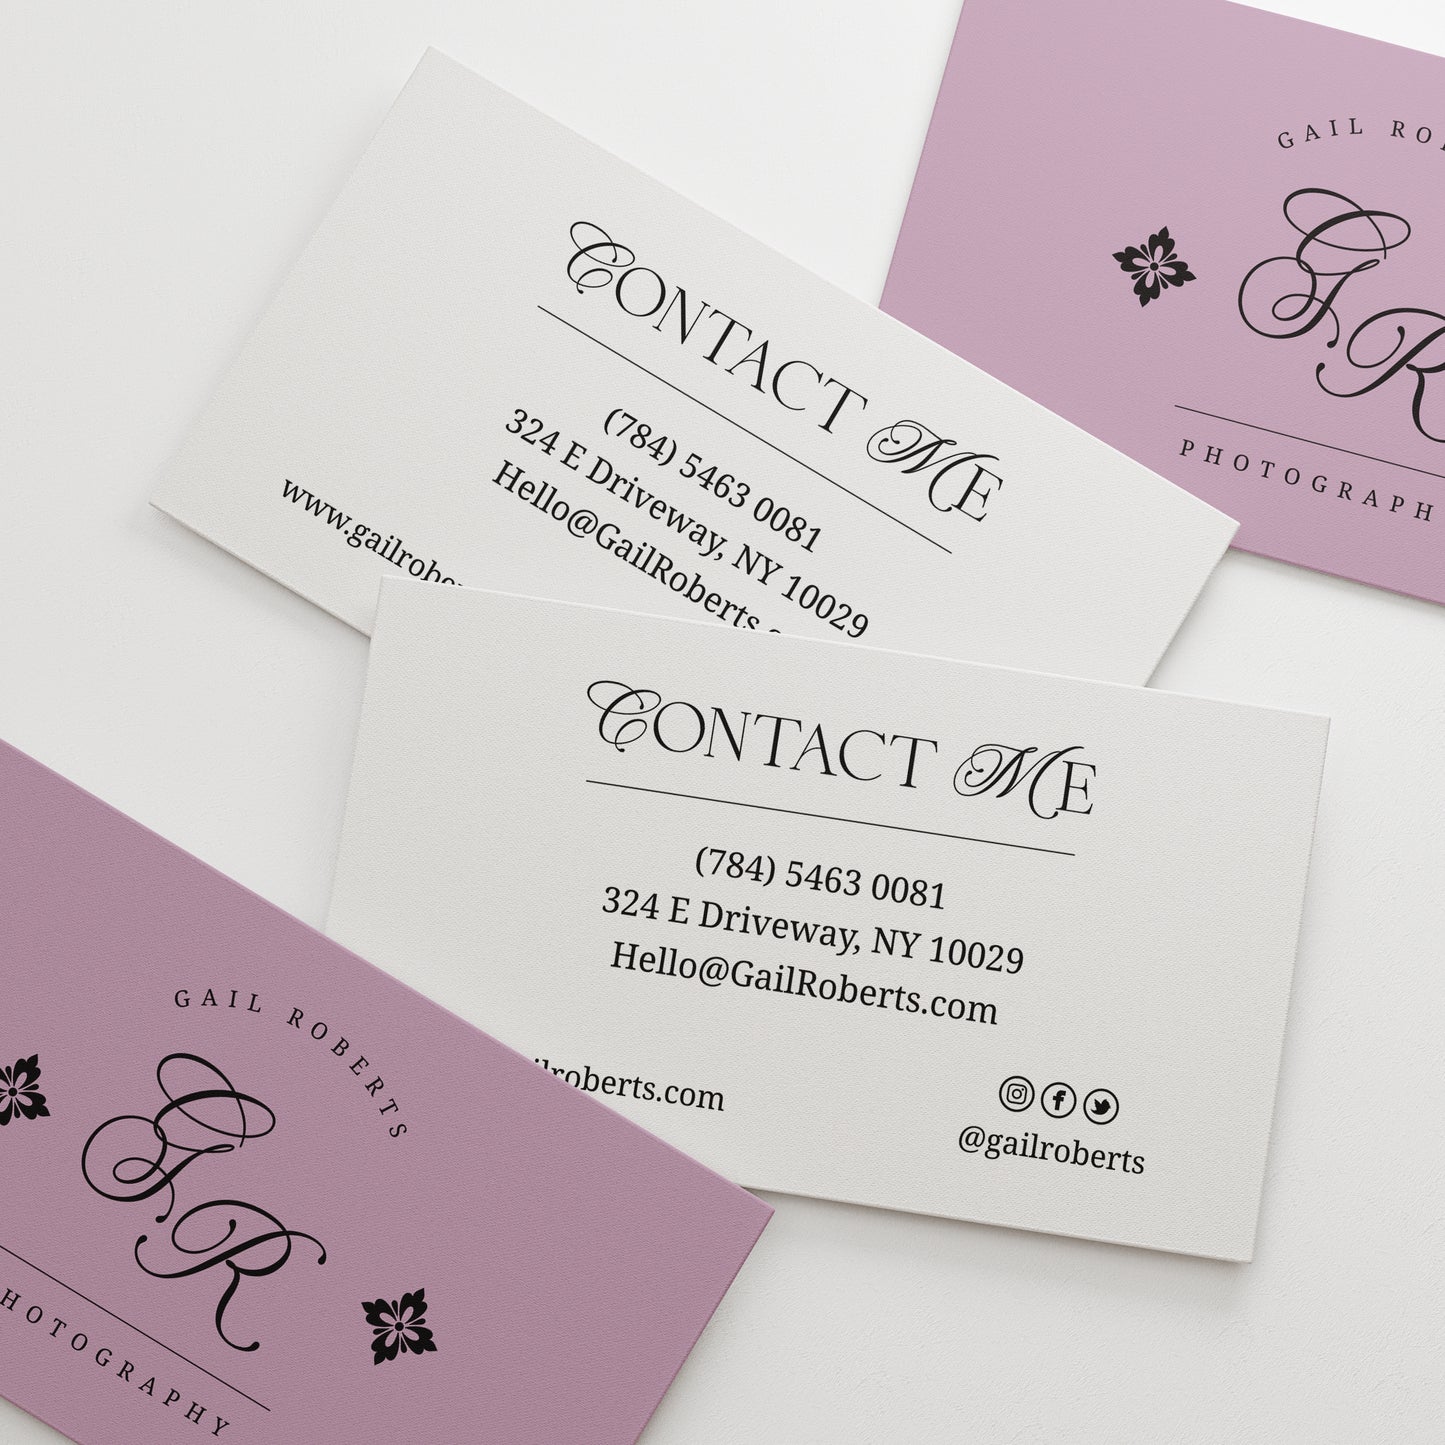 Personalized business cards from XOXOKristen, showcasing elegant monogram design and a variety of luxurious foil text options.